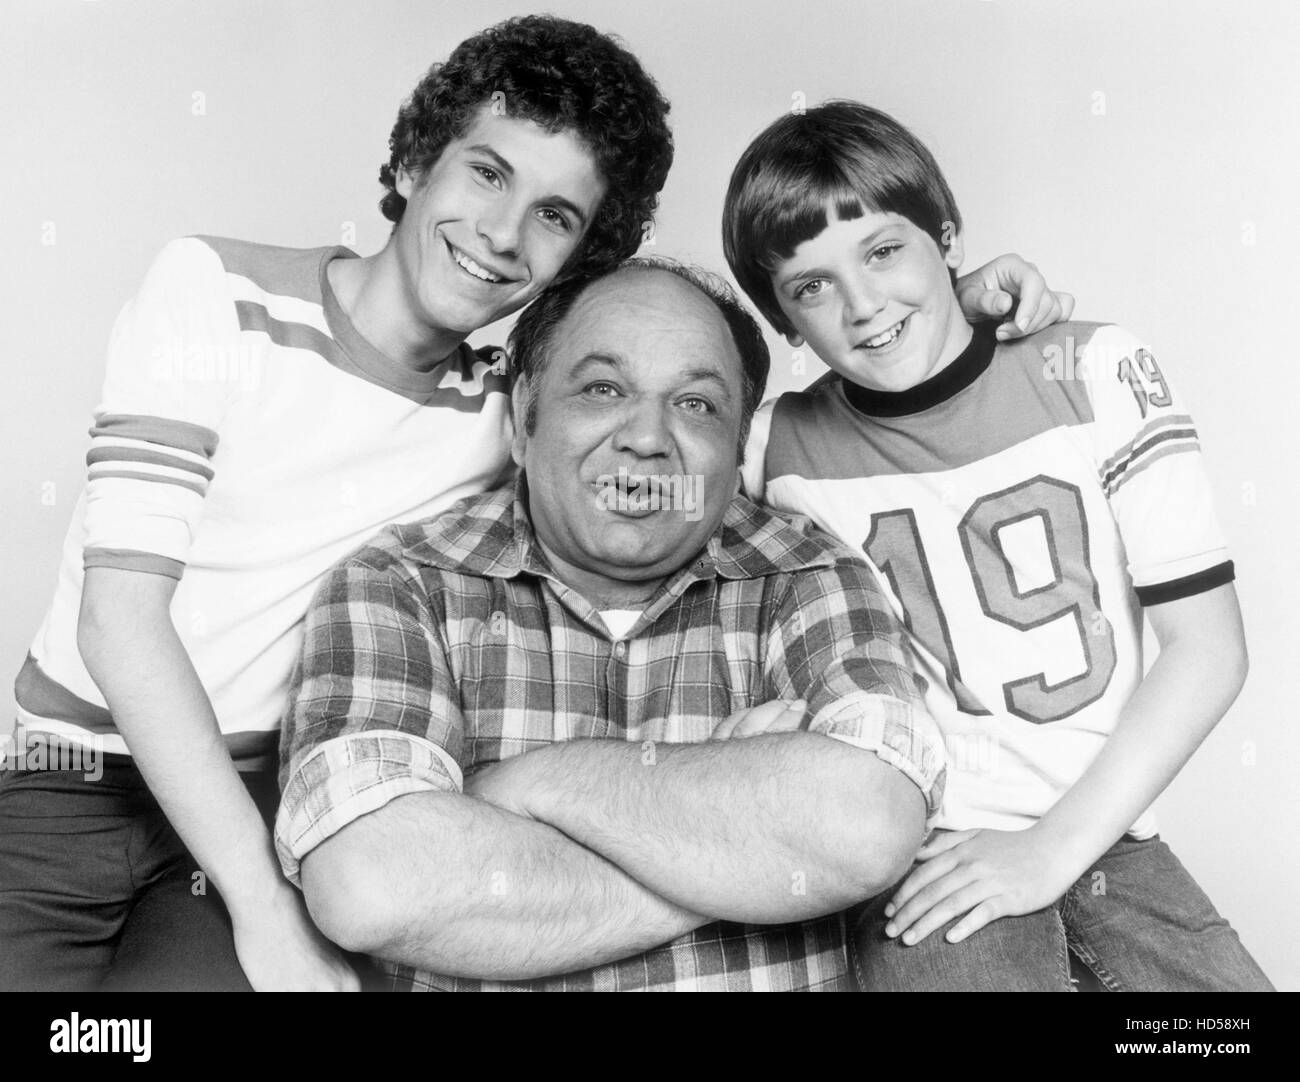 JOE AND SONS, from left: Barry Miller, Richard Castellano, Jimmy Baio, 1975-76. Stock Photo